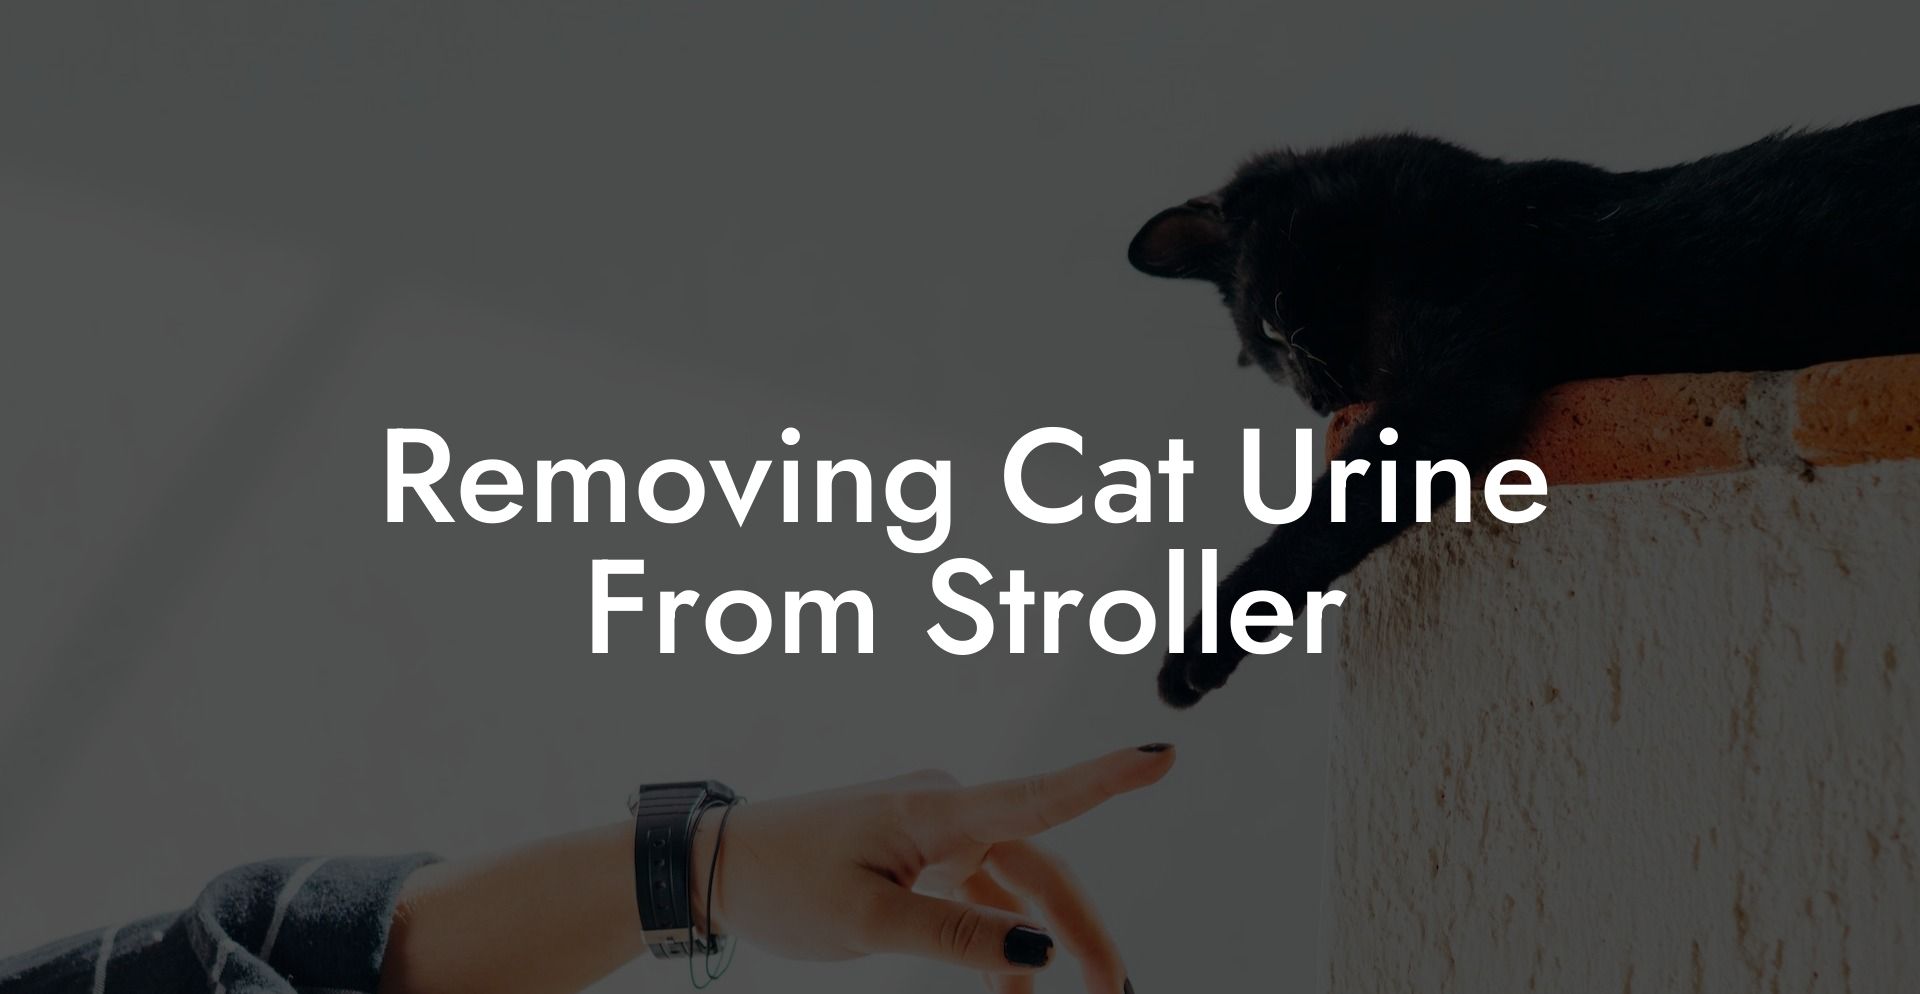 Removing Cat Urine From Stroller